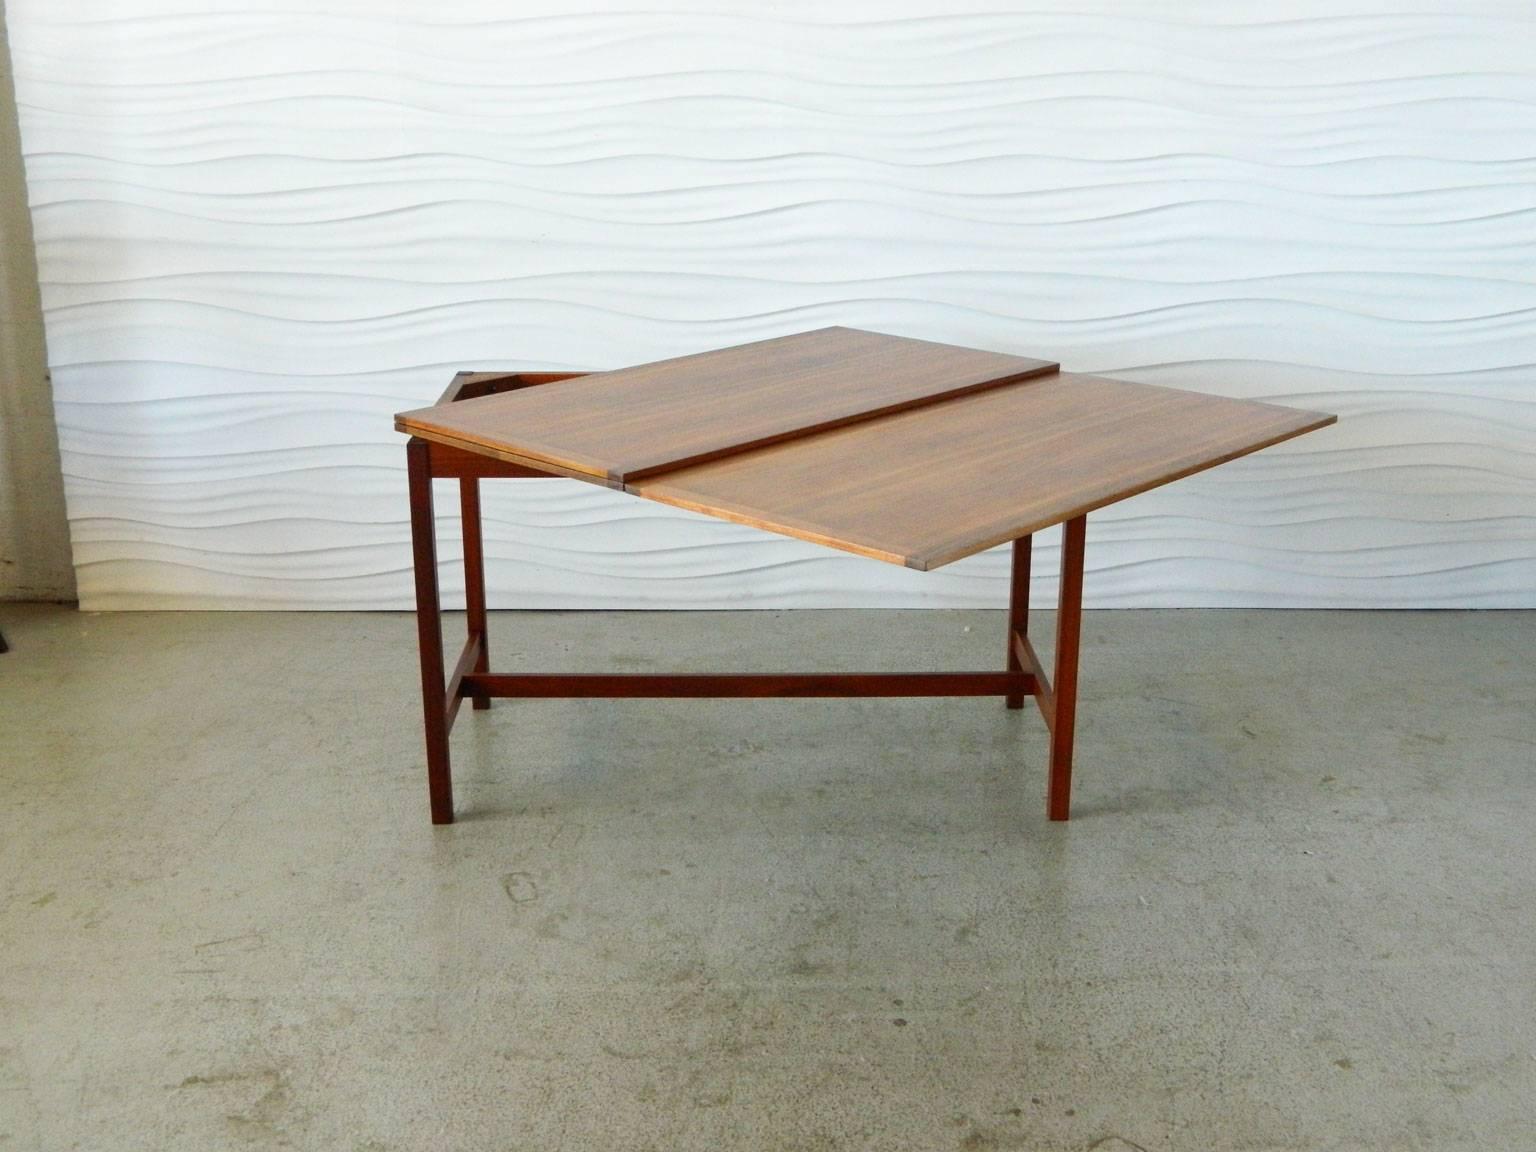 Designed by Karl Erik Ekselius, this drop-leaf table is made of walnut and has brass accents. It was manufactured by J.O. Carlsson. The table measures 66